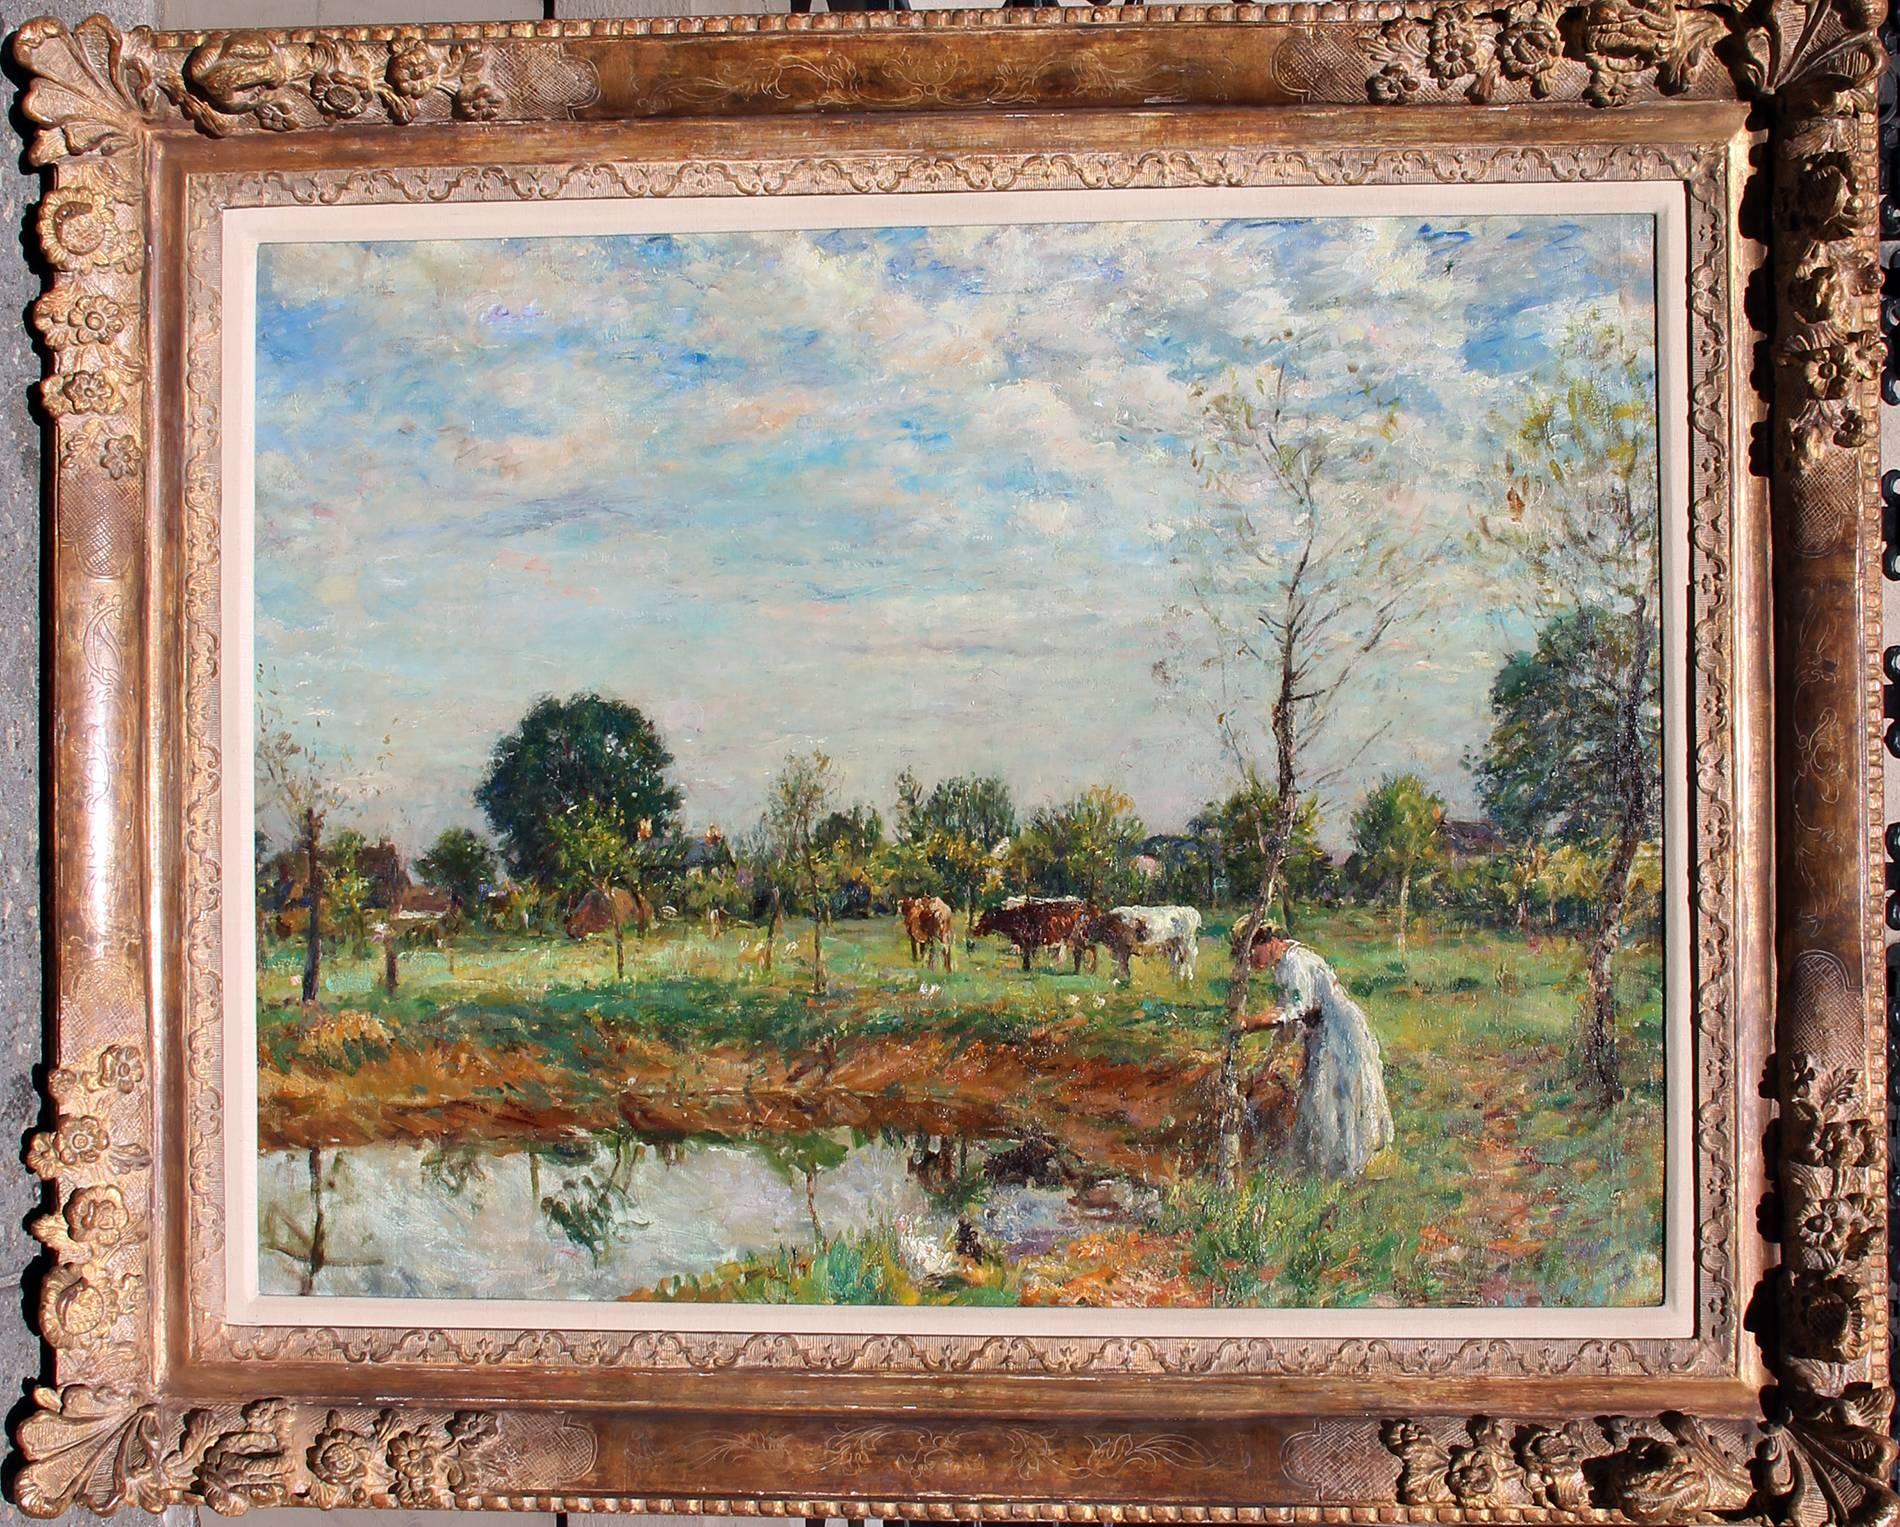 Silvery Day, The Farm Pond - Painting by William Mark Fisher